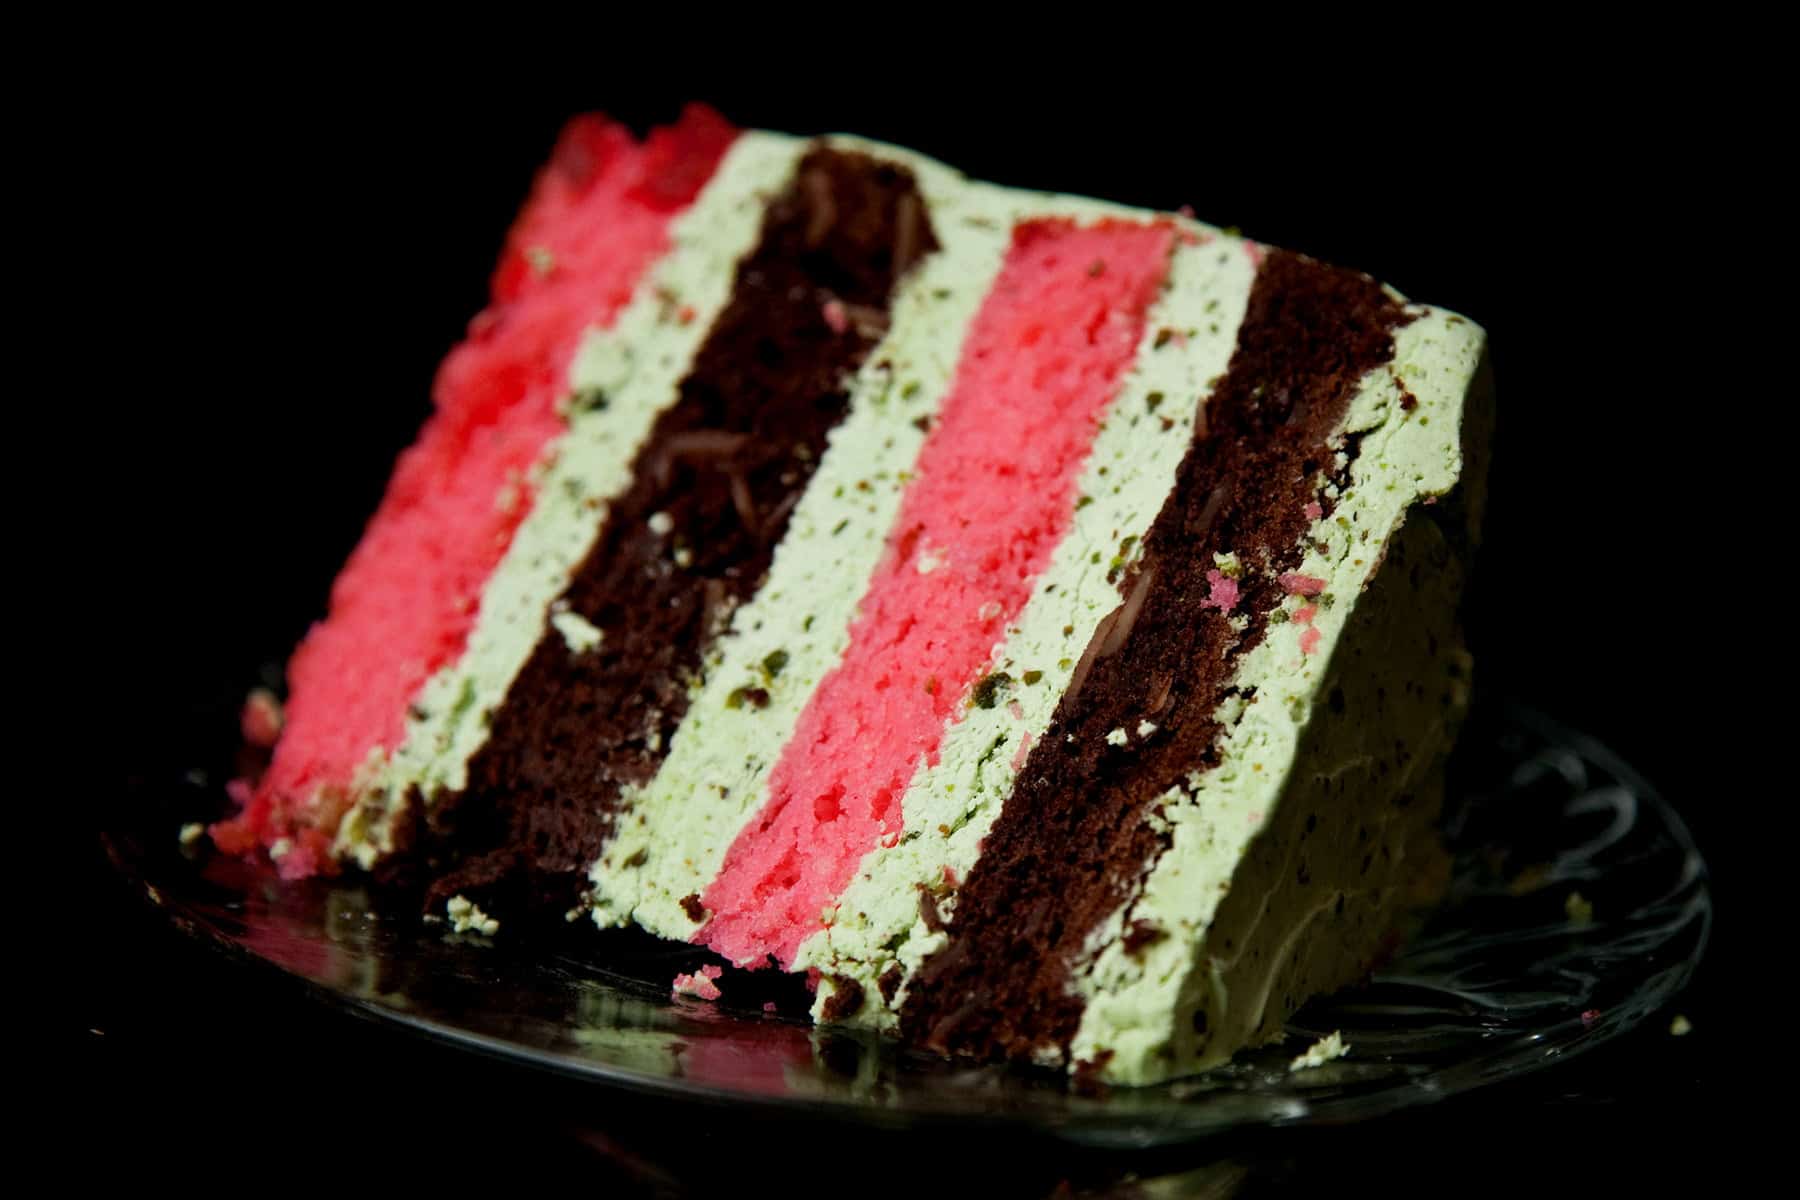 A close up photo of a slice of spumoni torte - alternating layers of chocolate cake and cherry cake, filled and frosted with pistachio buttercream.